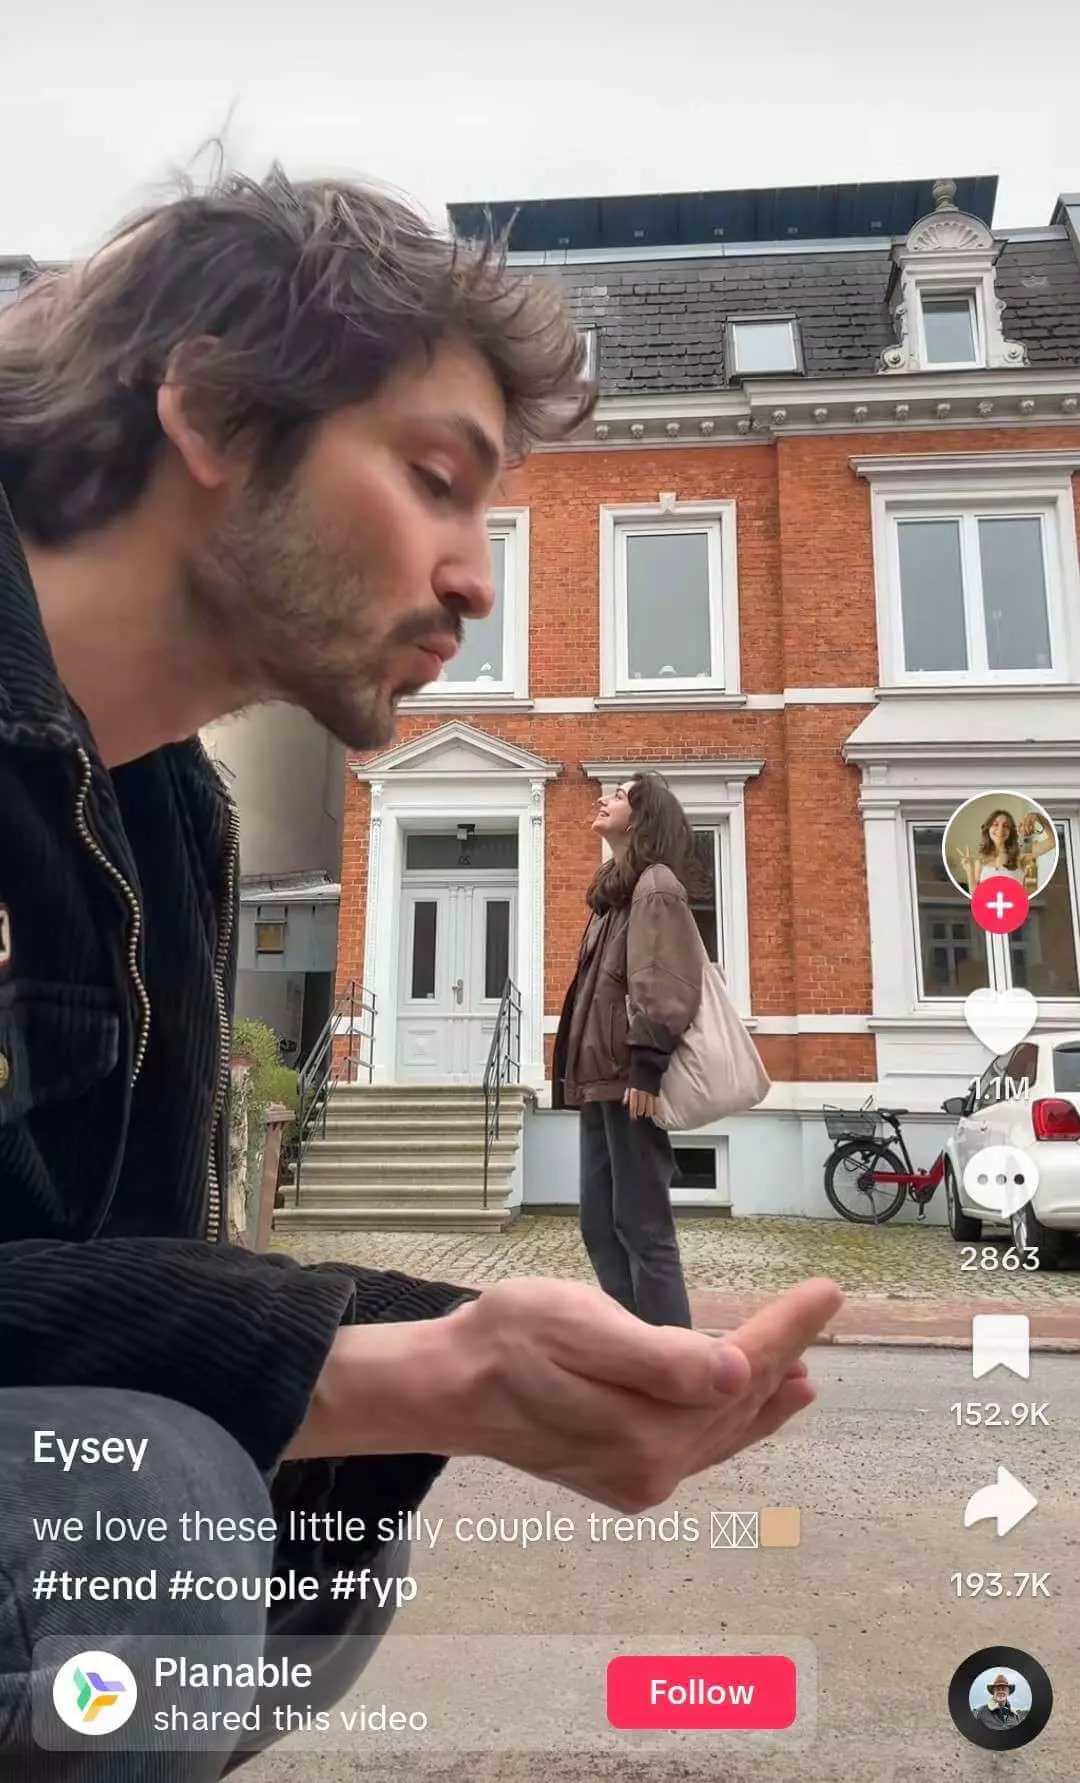 Man in foreground making a playful expression with a woman standing in the background on a residential street, featured in a light-hearted social media video about couple dynamics.